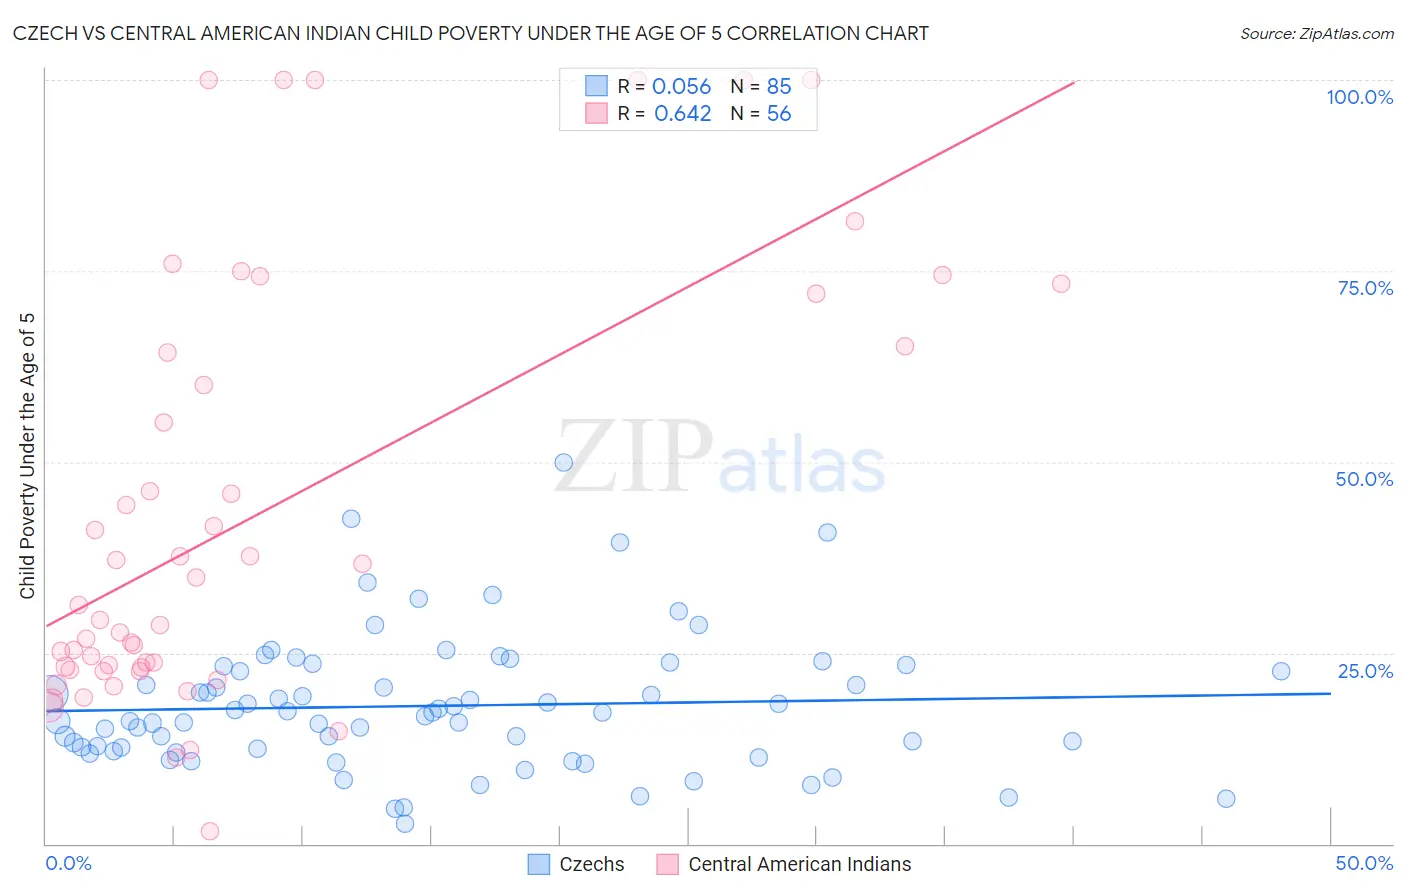 Czech vs Central American Indian Child Poverty Under the Age of 5